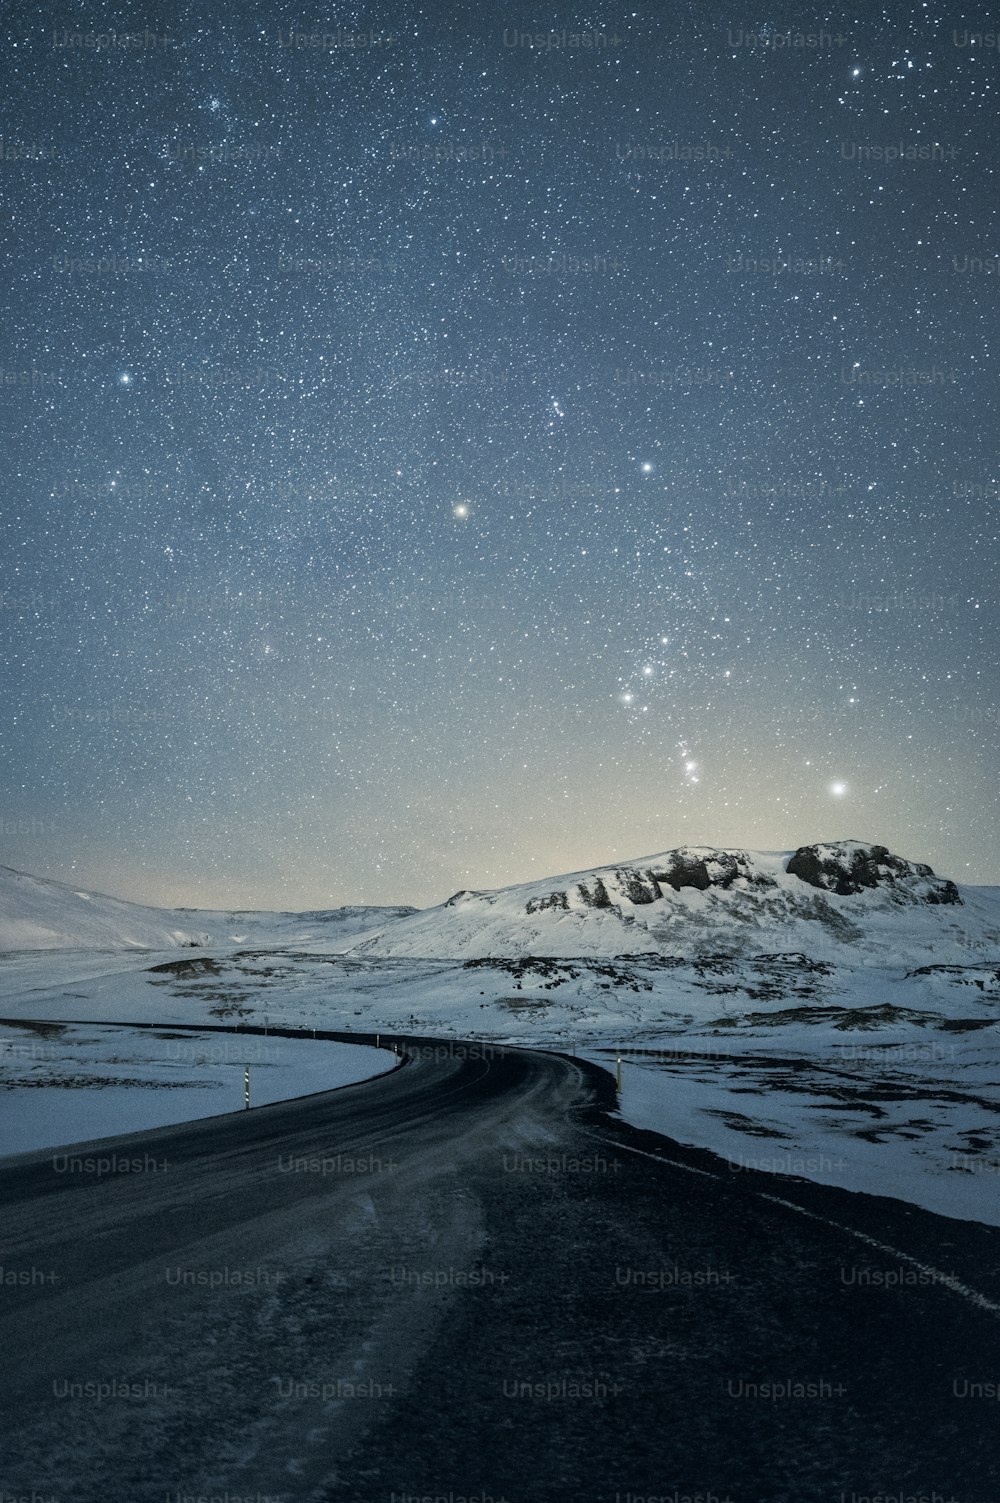 the night sky is filled with stars above a snowy mountain